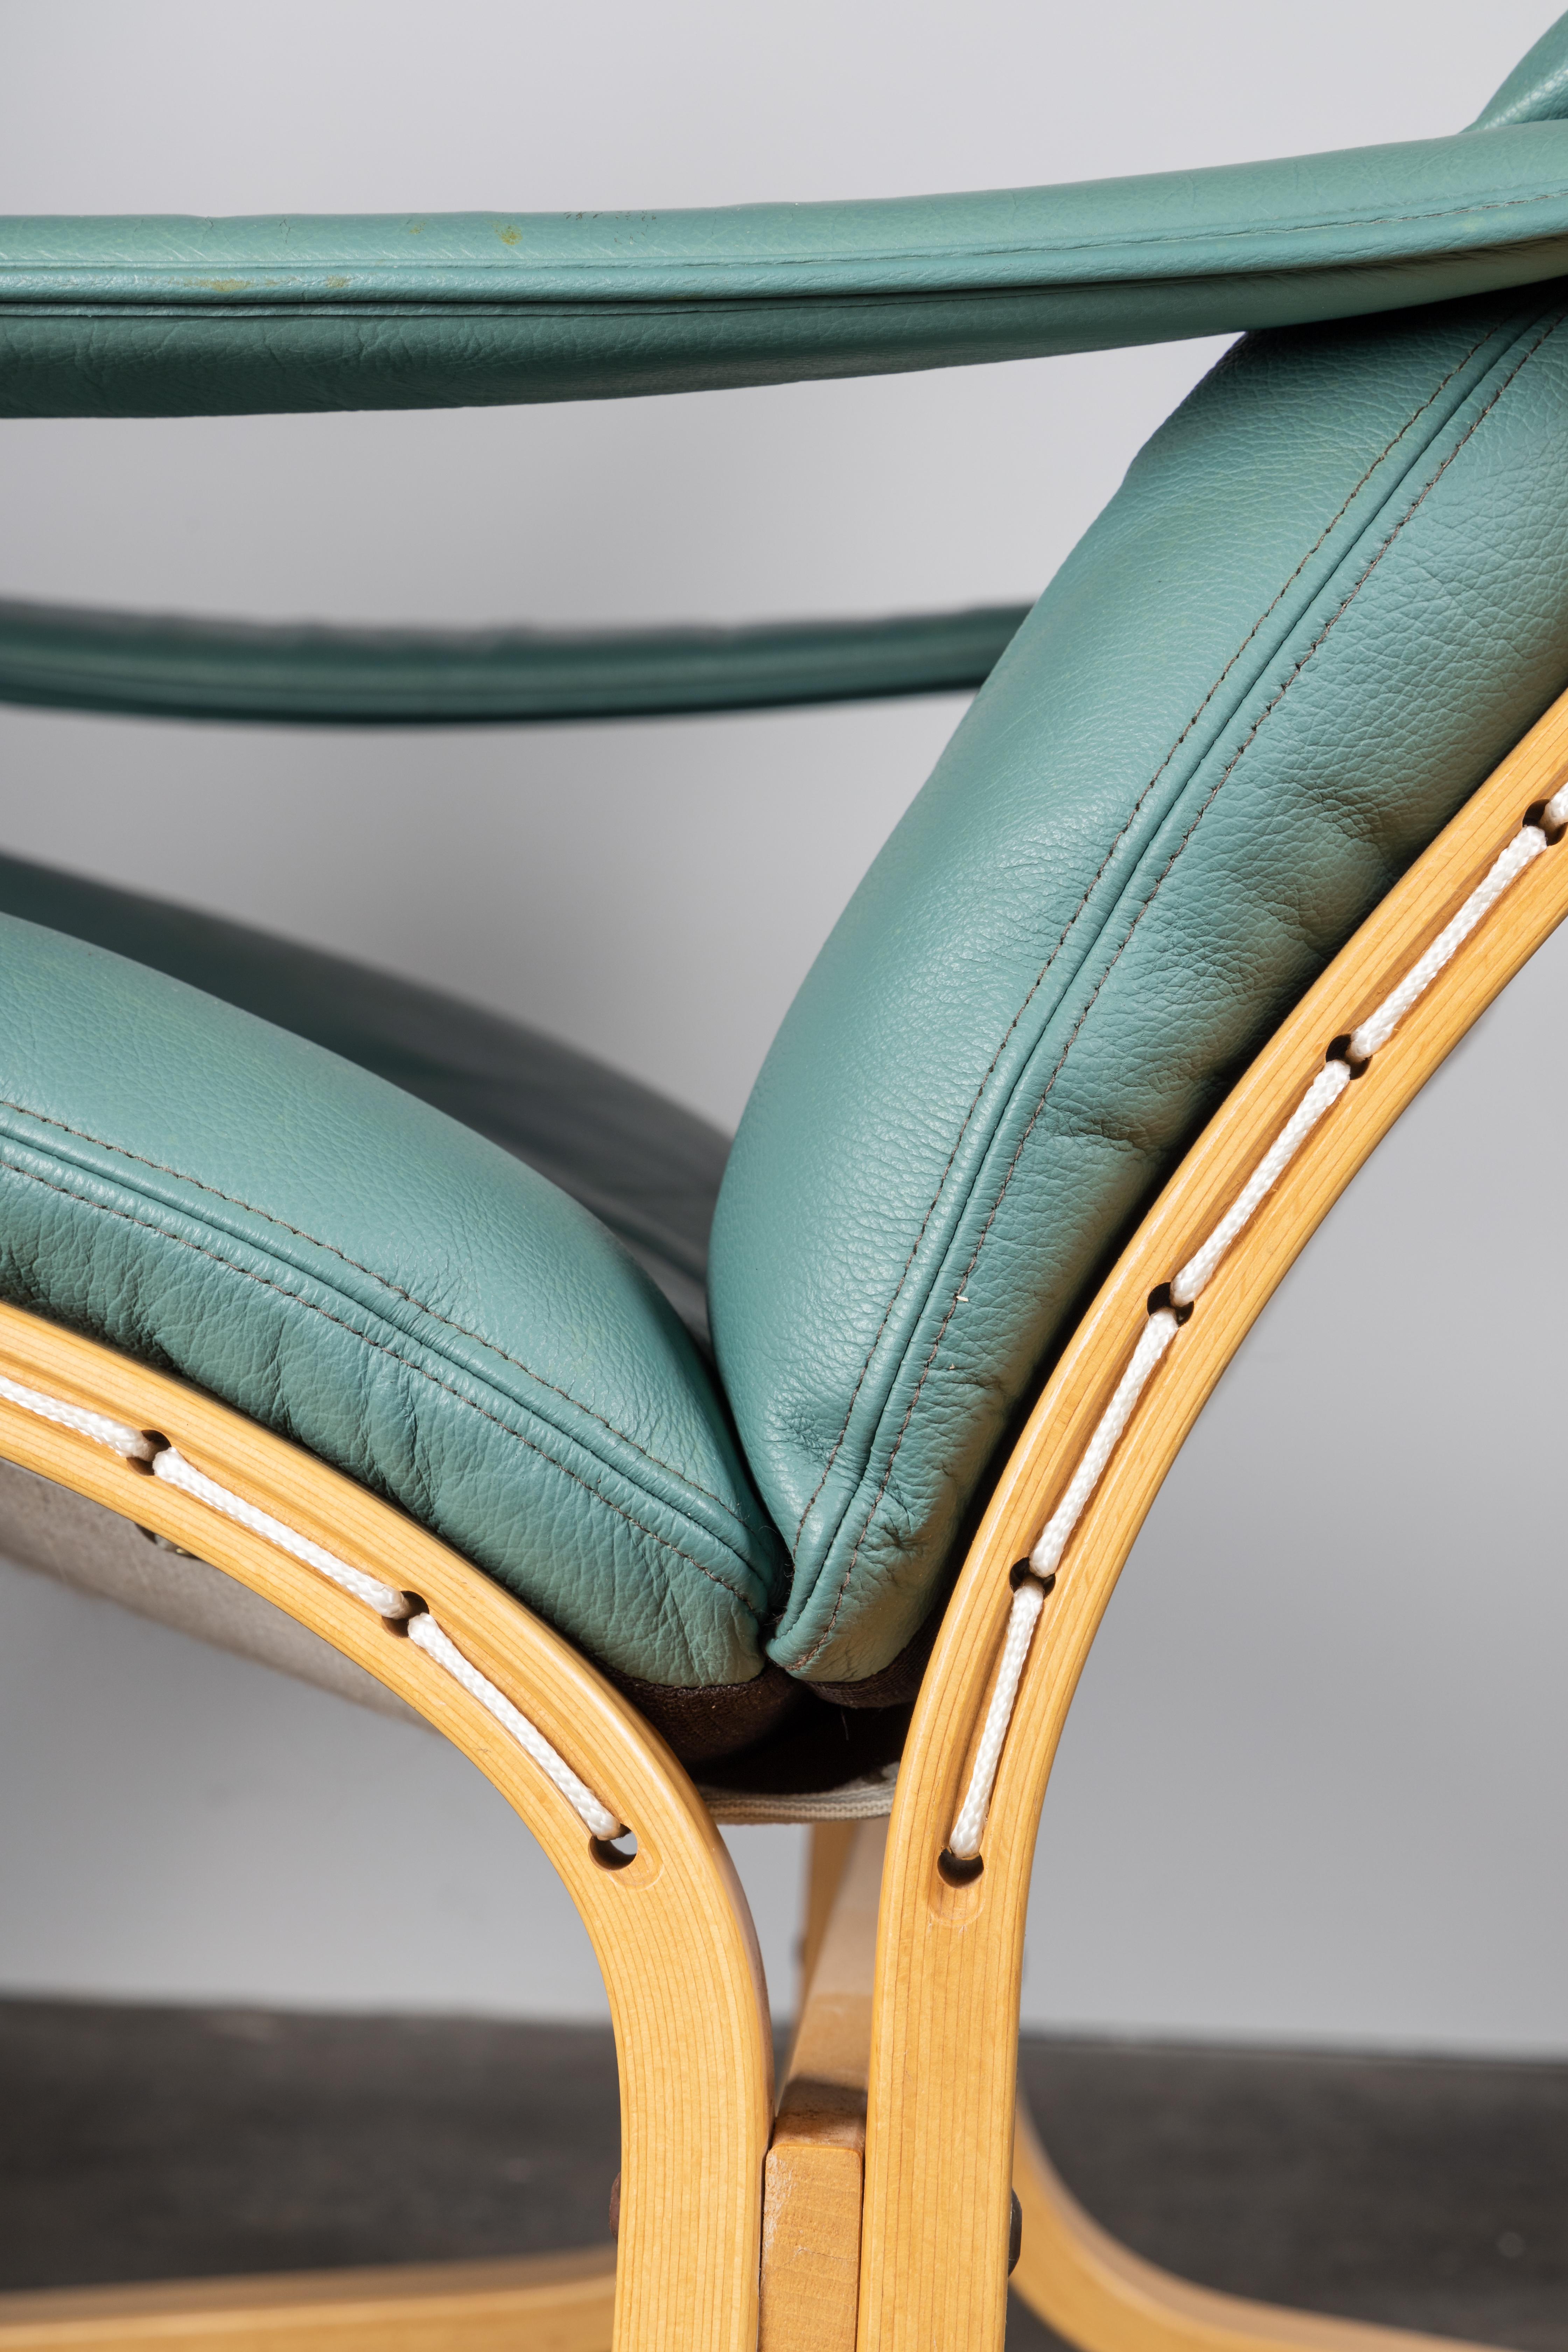 Norwegian Siesta Chair Set by Relling in Birch & Turquoise Leather for Westnofa 2